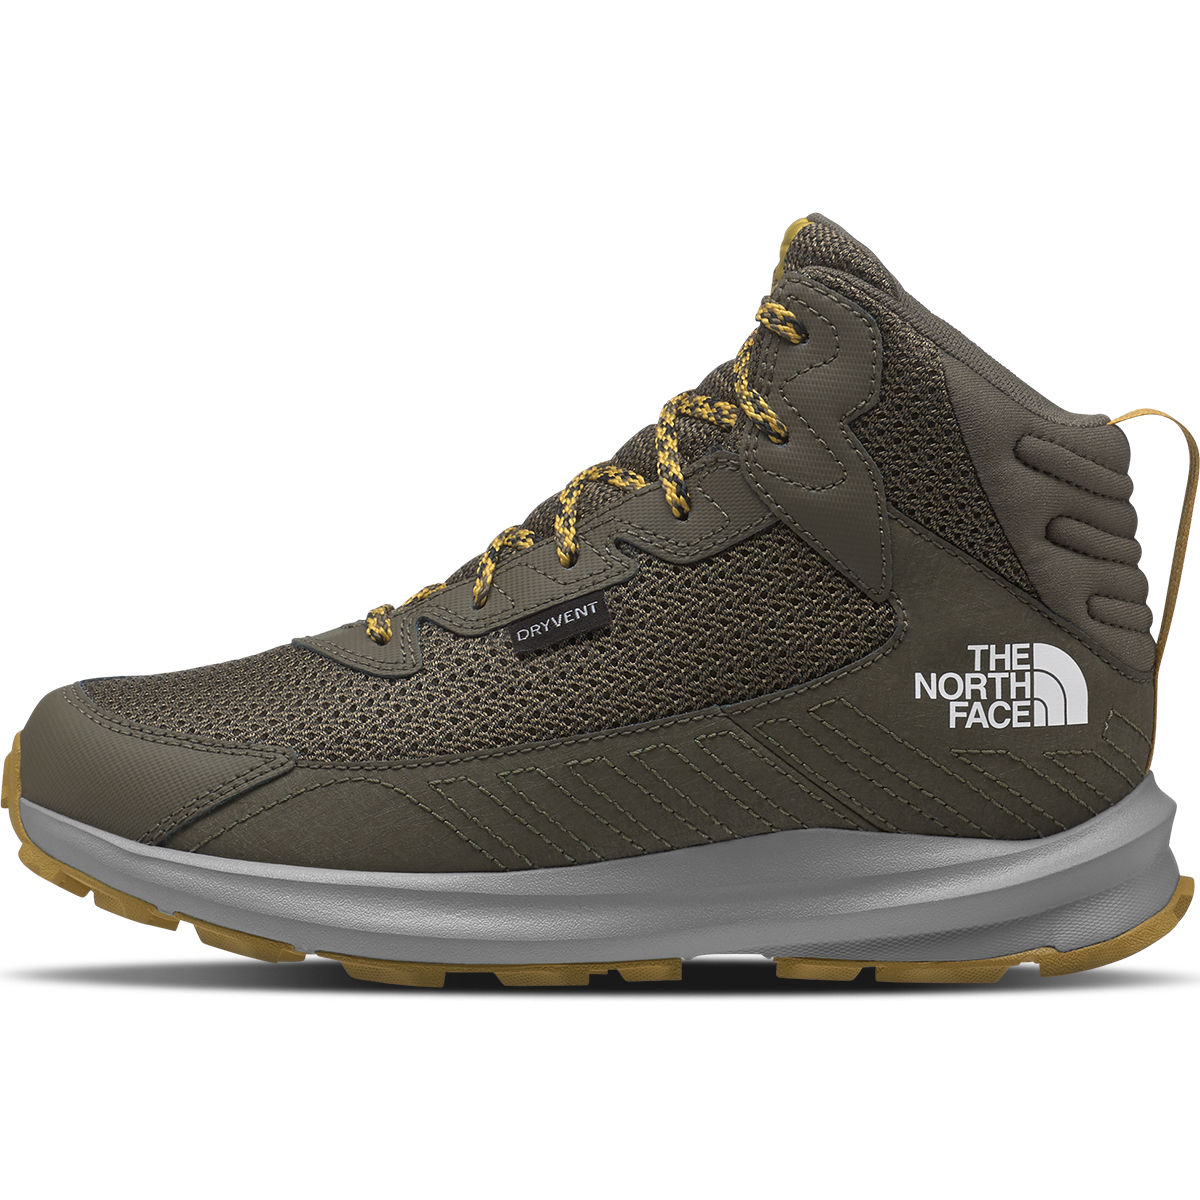 The North Face NF0A7W5V